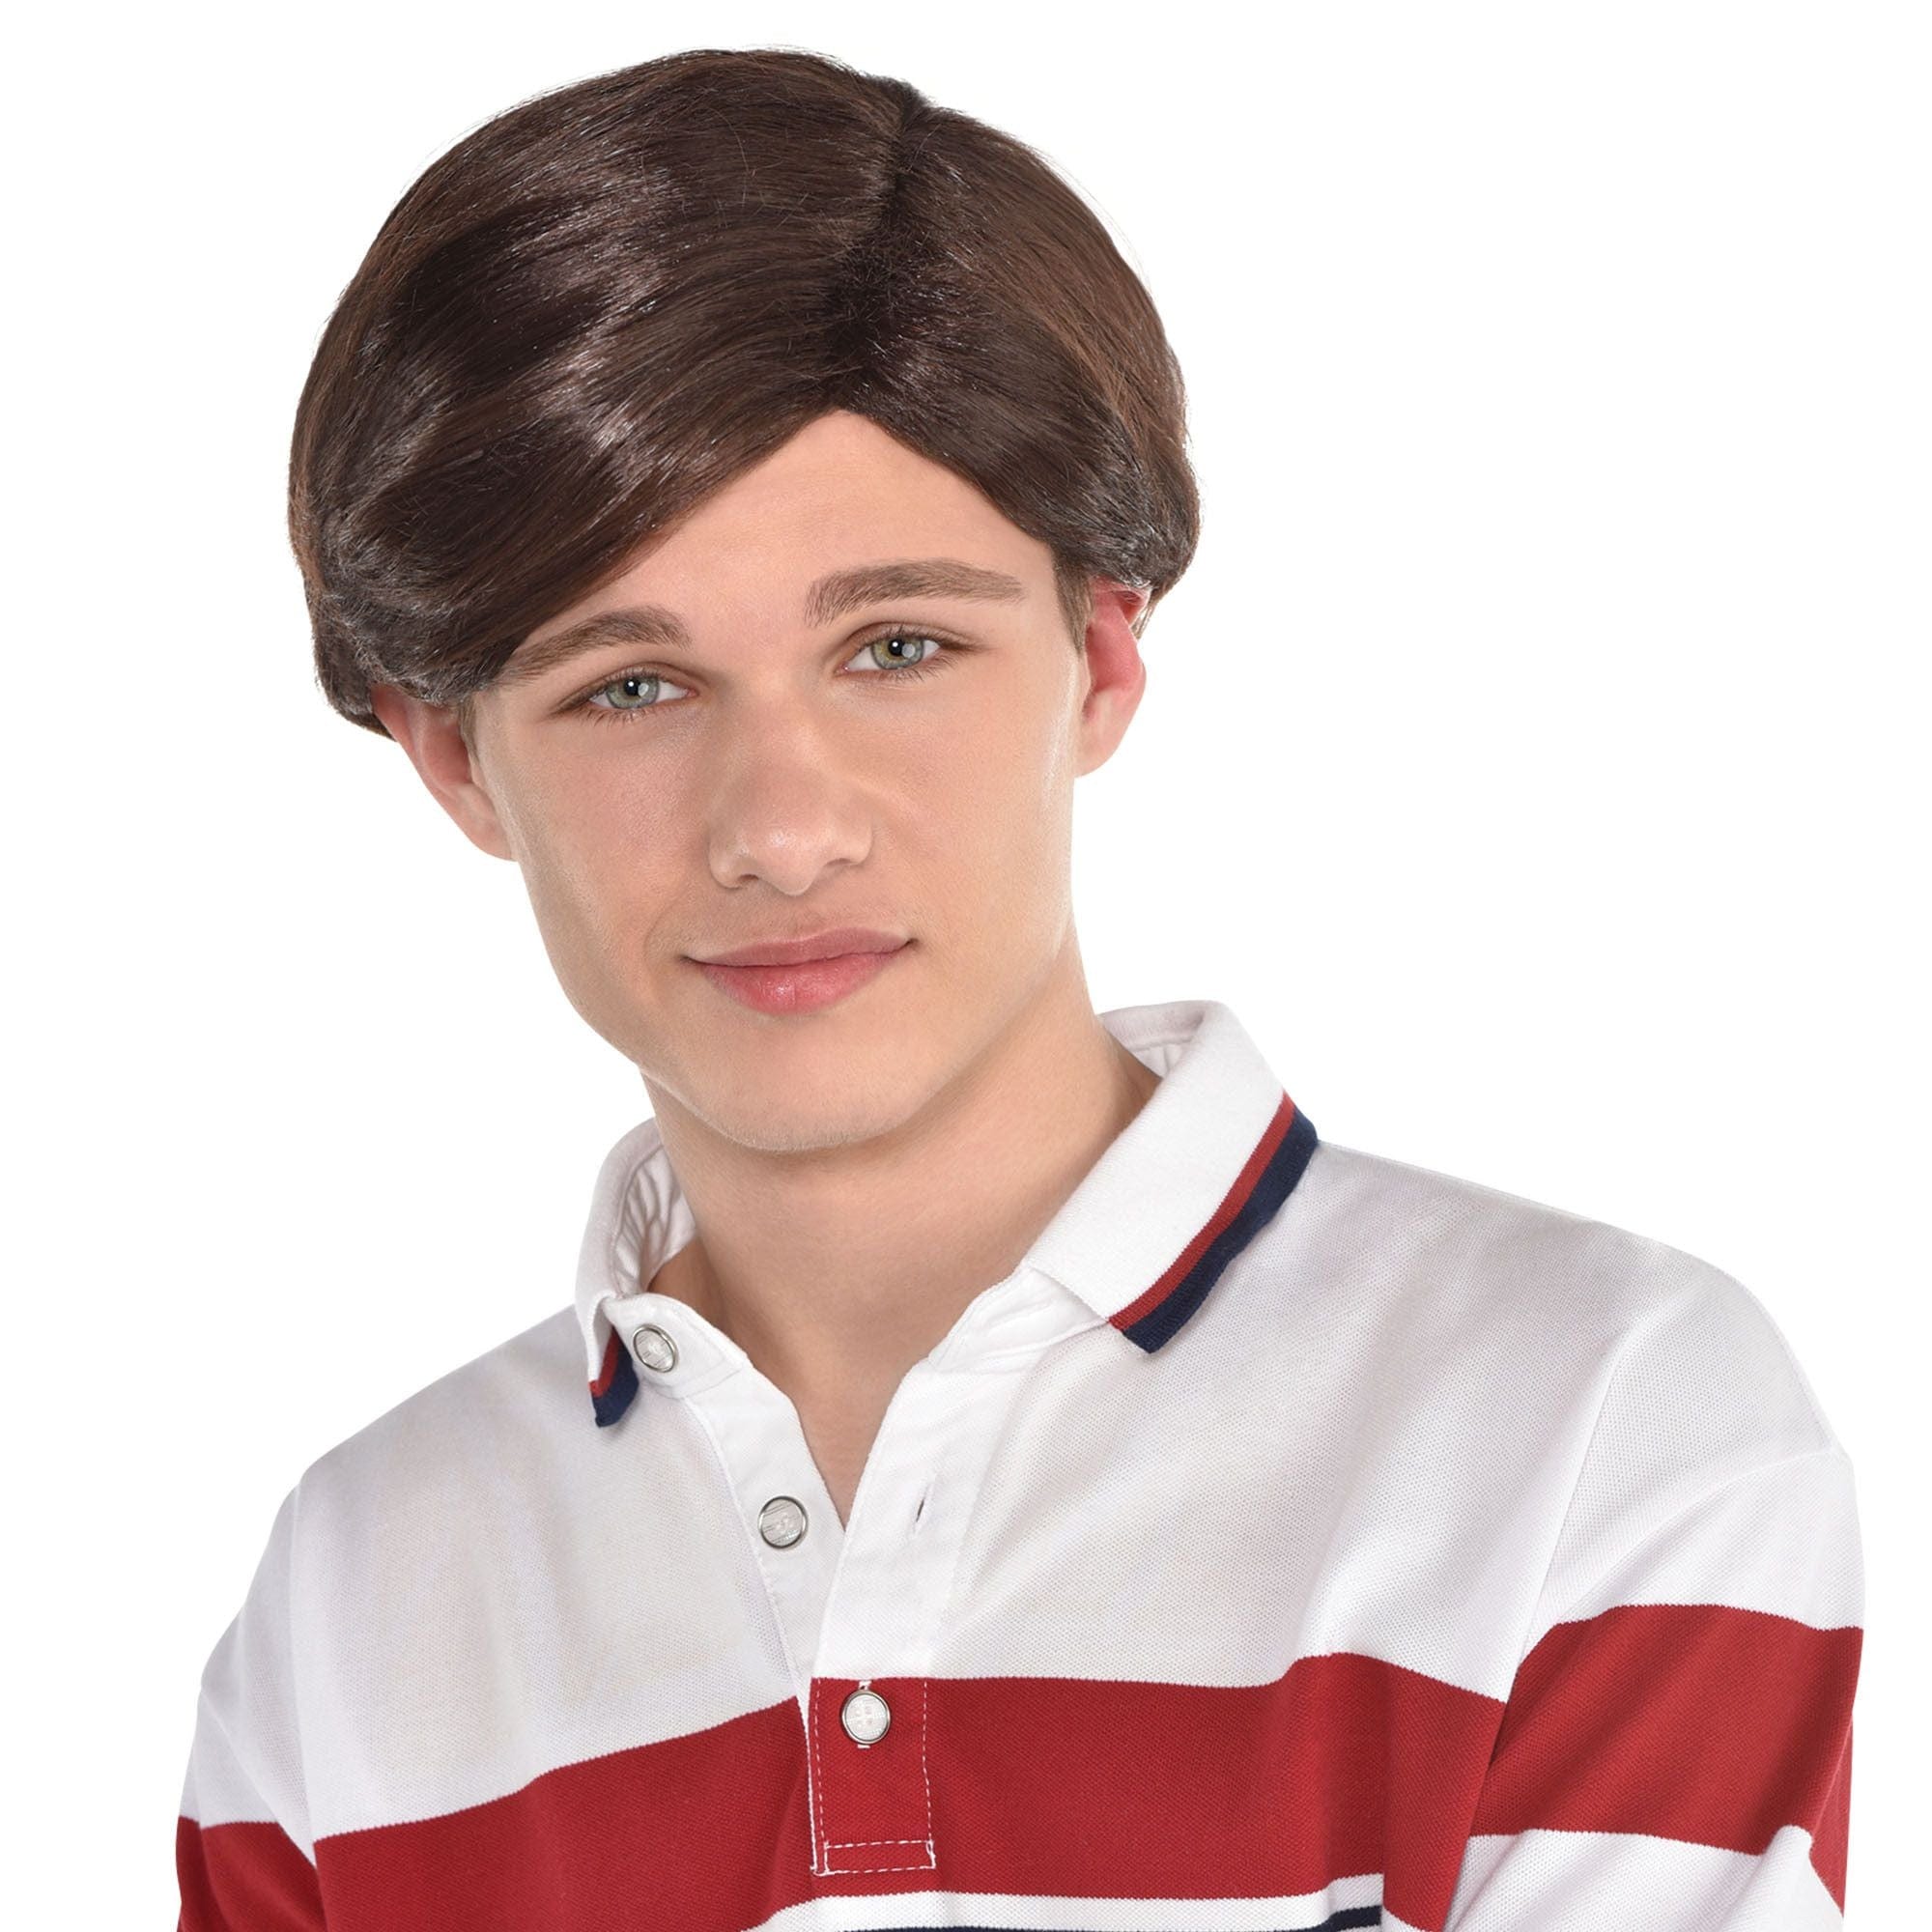 Amscan COSTUMES: WIGS 70's Dude Wig